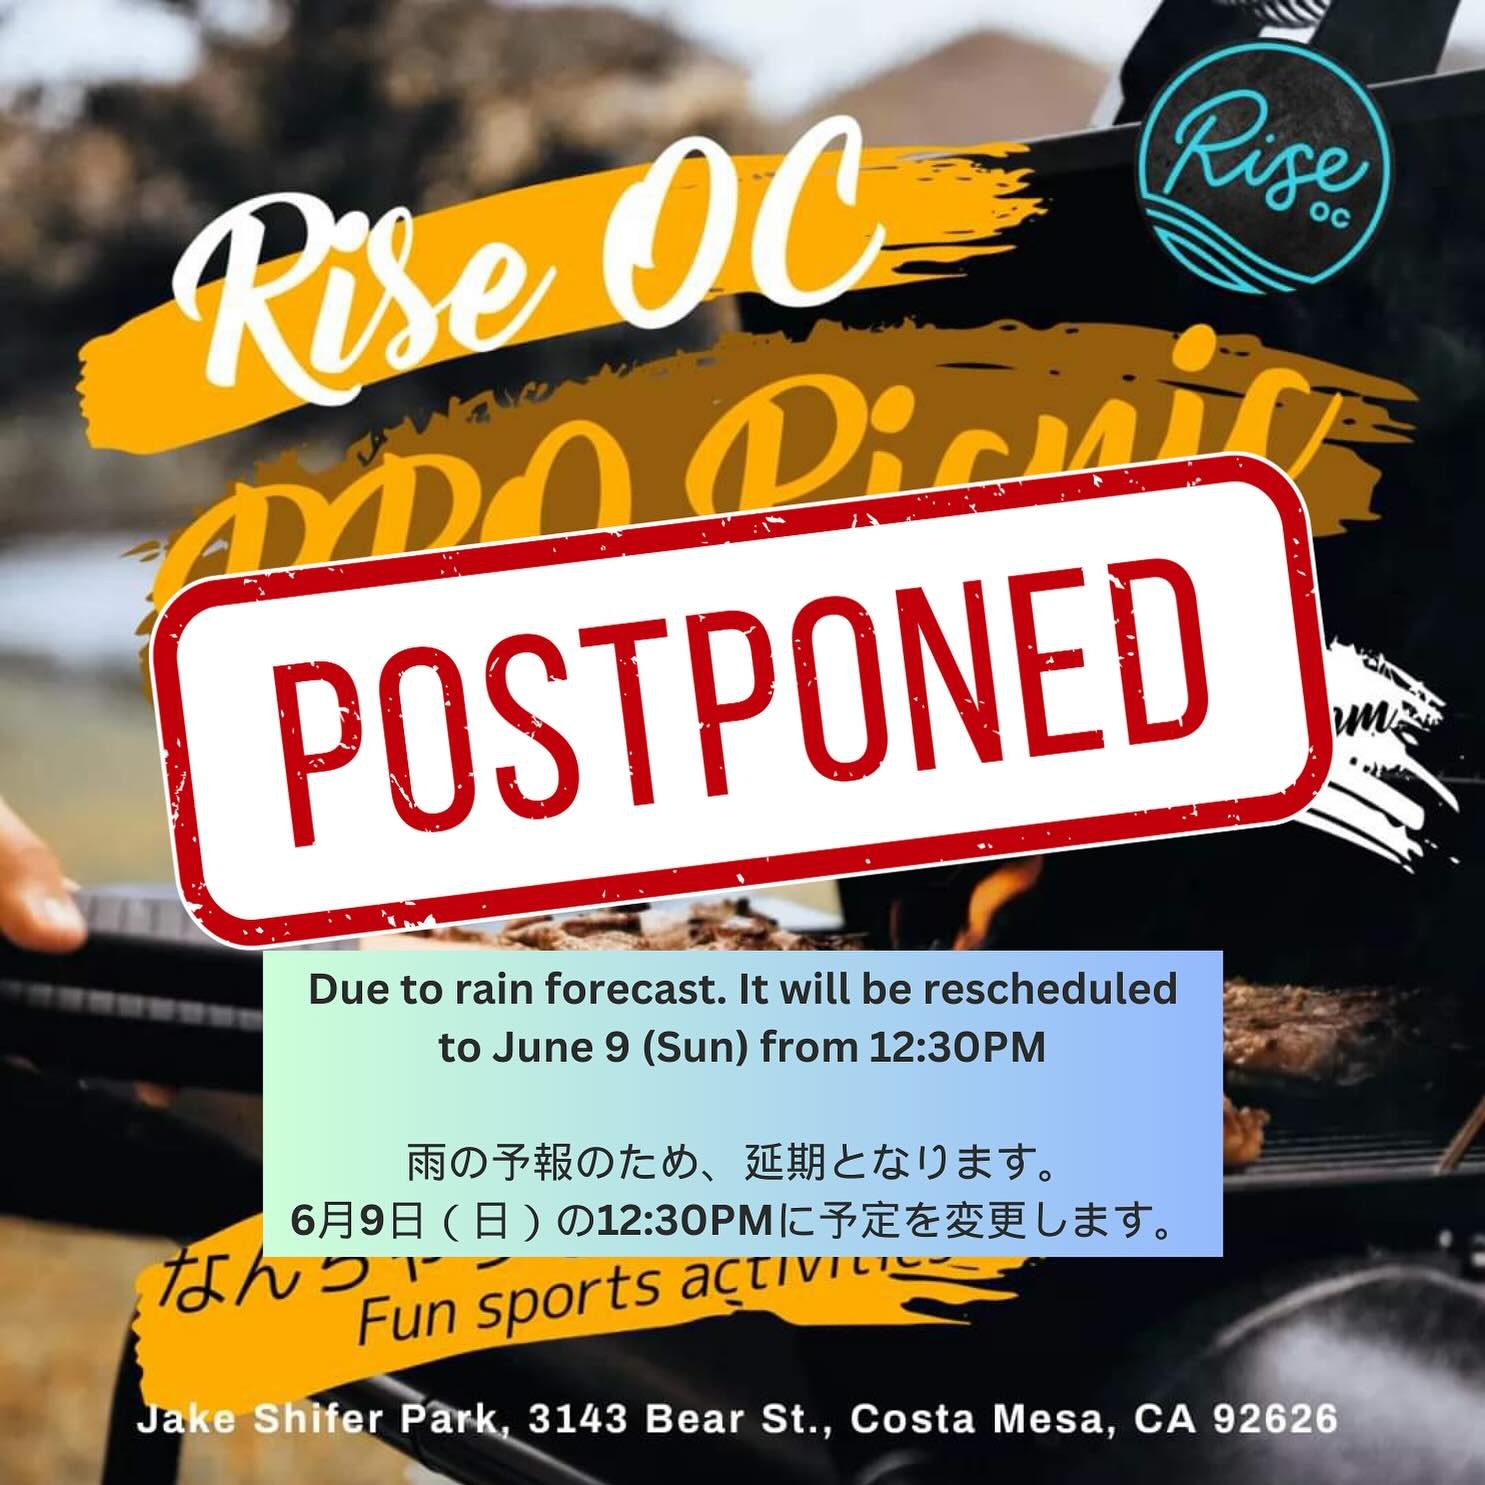 Our scheduled picnic has been postponed due to a chance of rain. ☔️🌧️ We will plan to have the picnic on June 9!